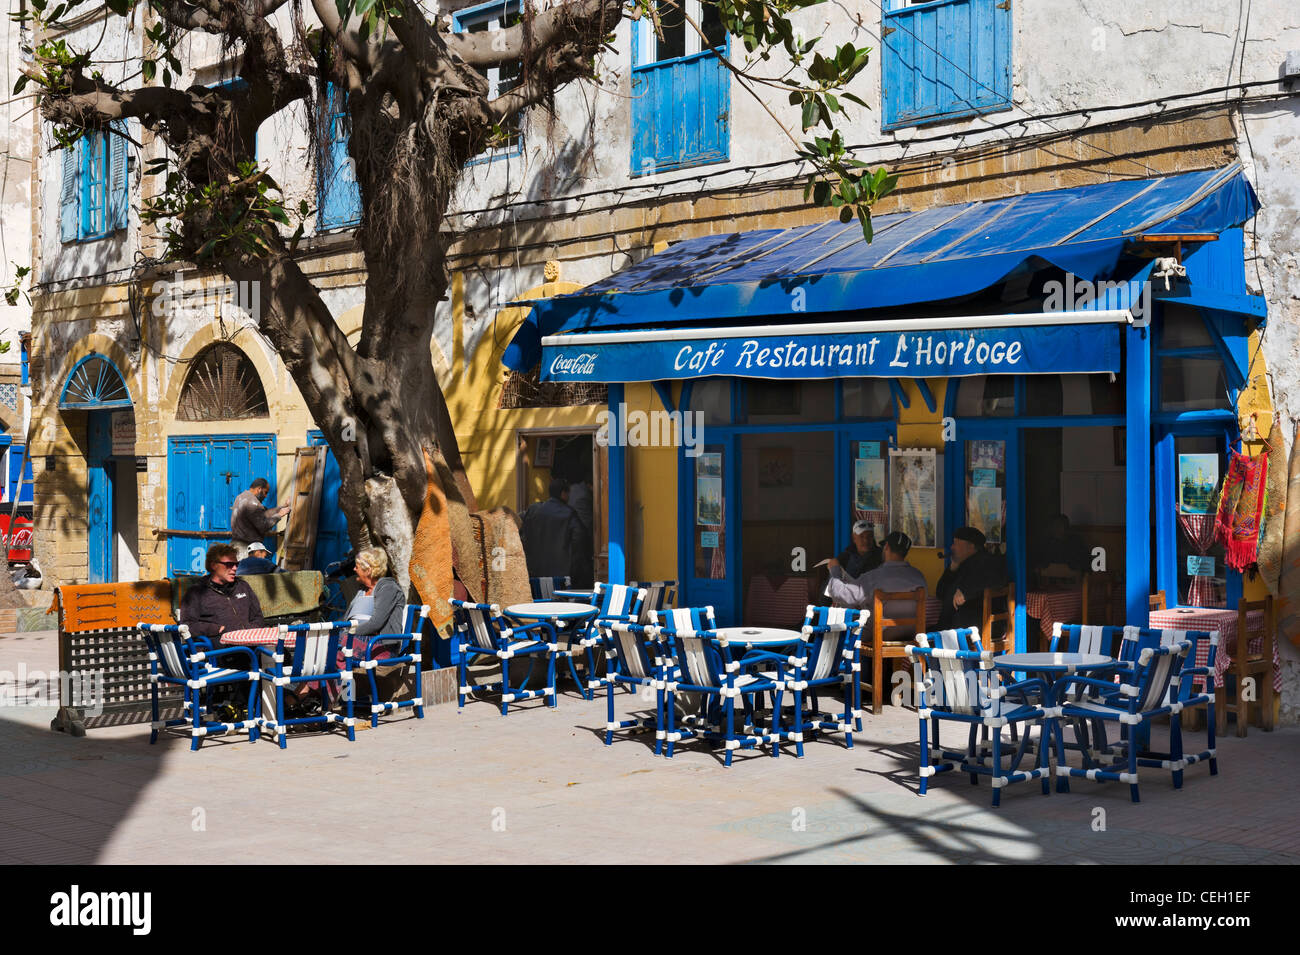 Cafe Restaurant L'Horloge in the Place Chefchaouni near the Medina and Kasbah, Essaouira, Morocco, North Africa Stock Photo